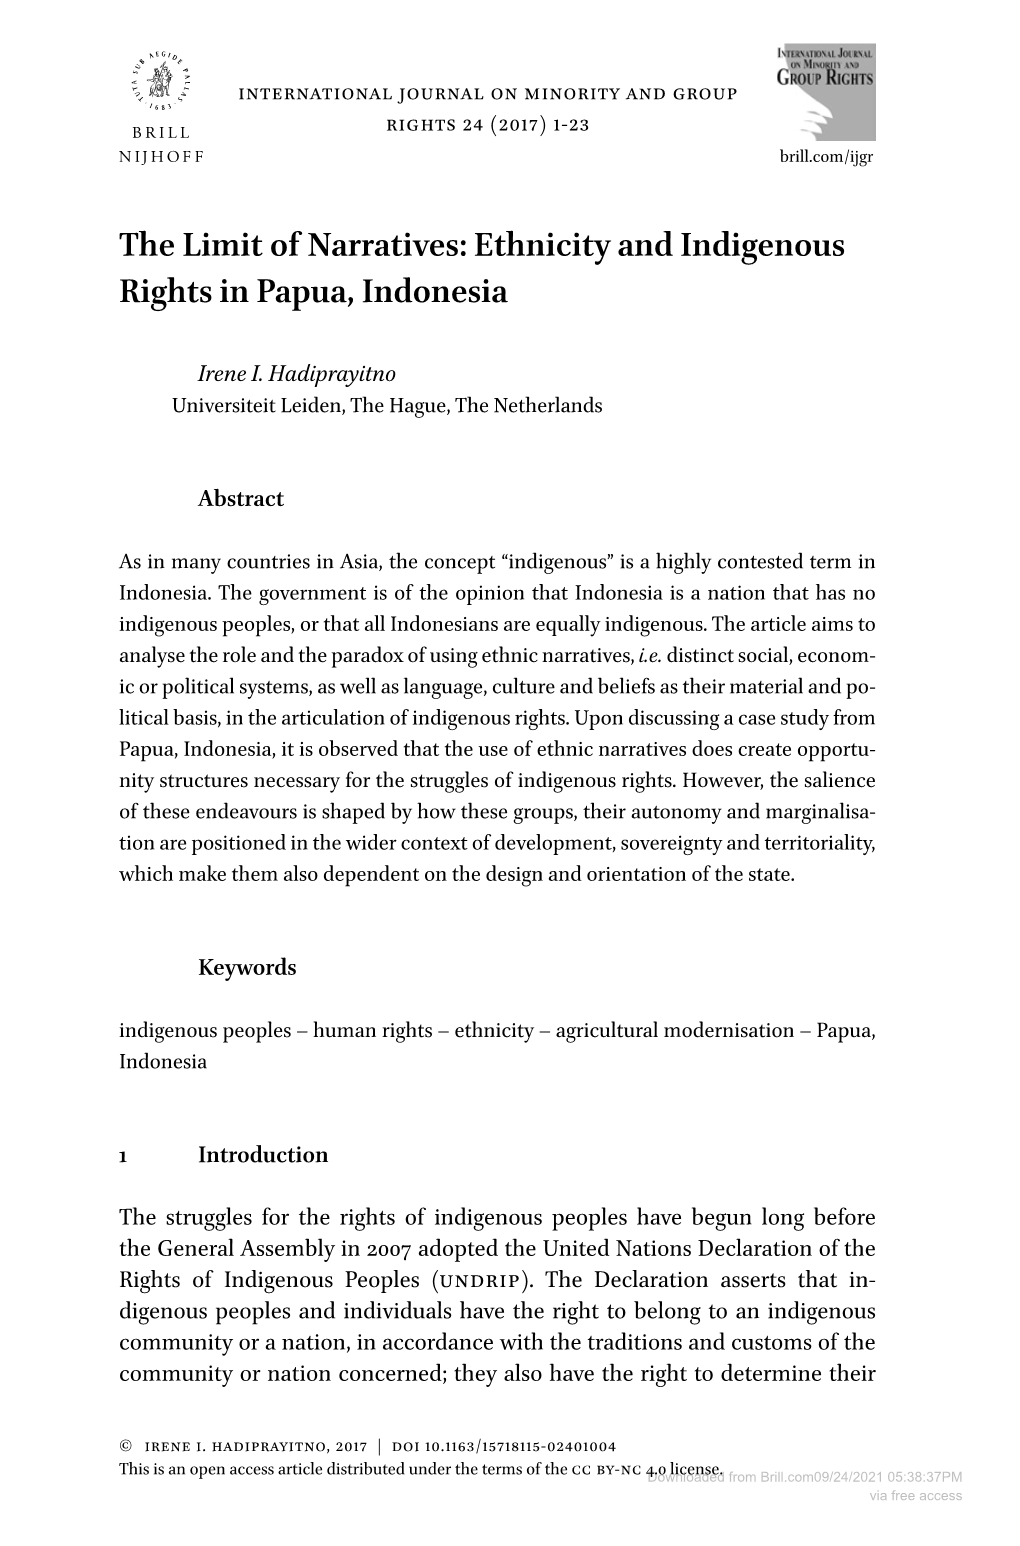 Ethnicity and Indigenous Rights in Papua, Indonesia